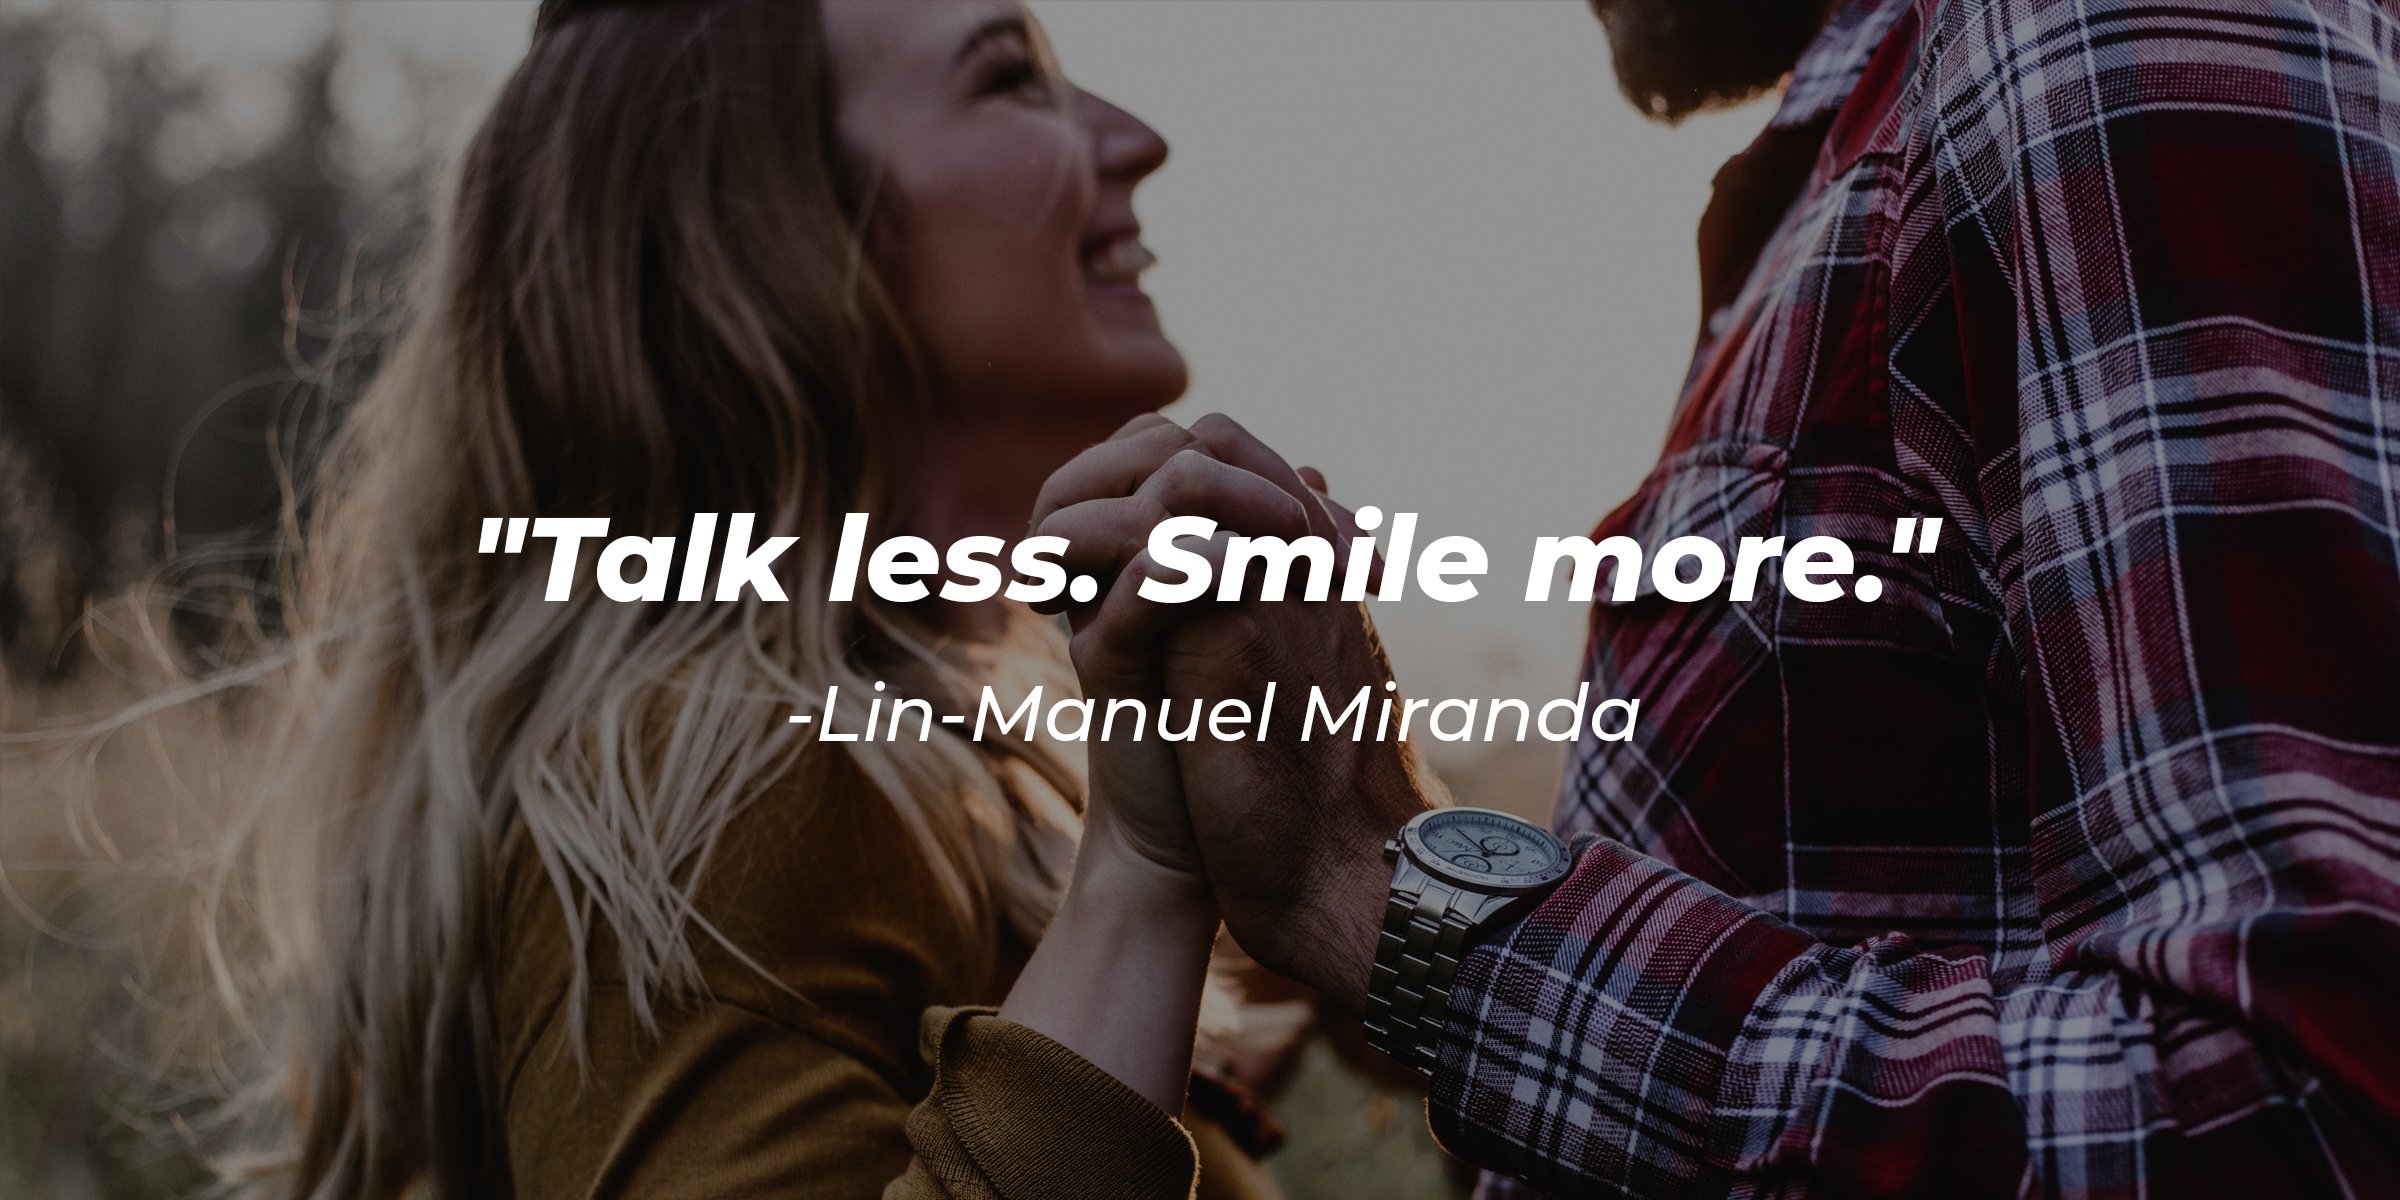 Source: Unsplash | A woman looking up and smiling with Lin-Manuel Miranda's quote: "Talk less. Smile more."